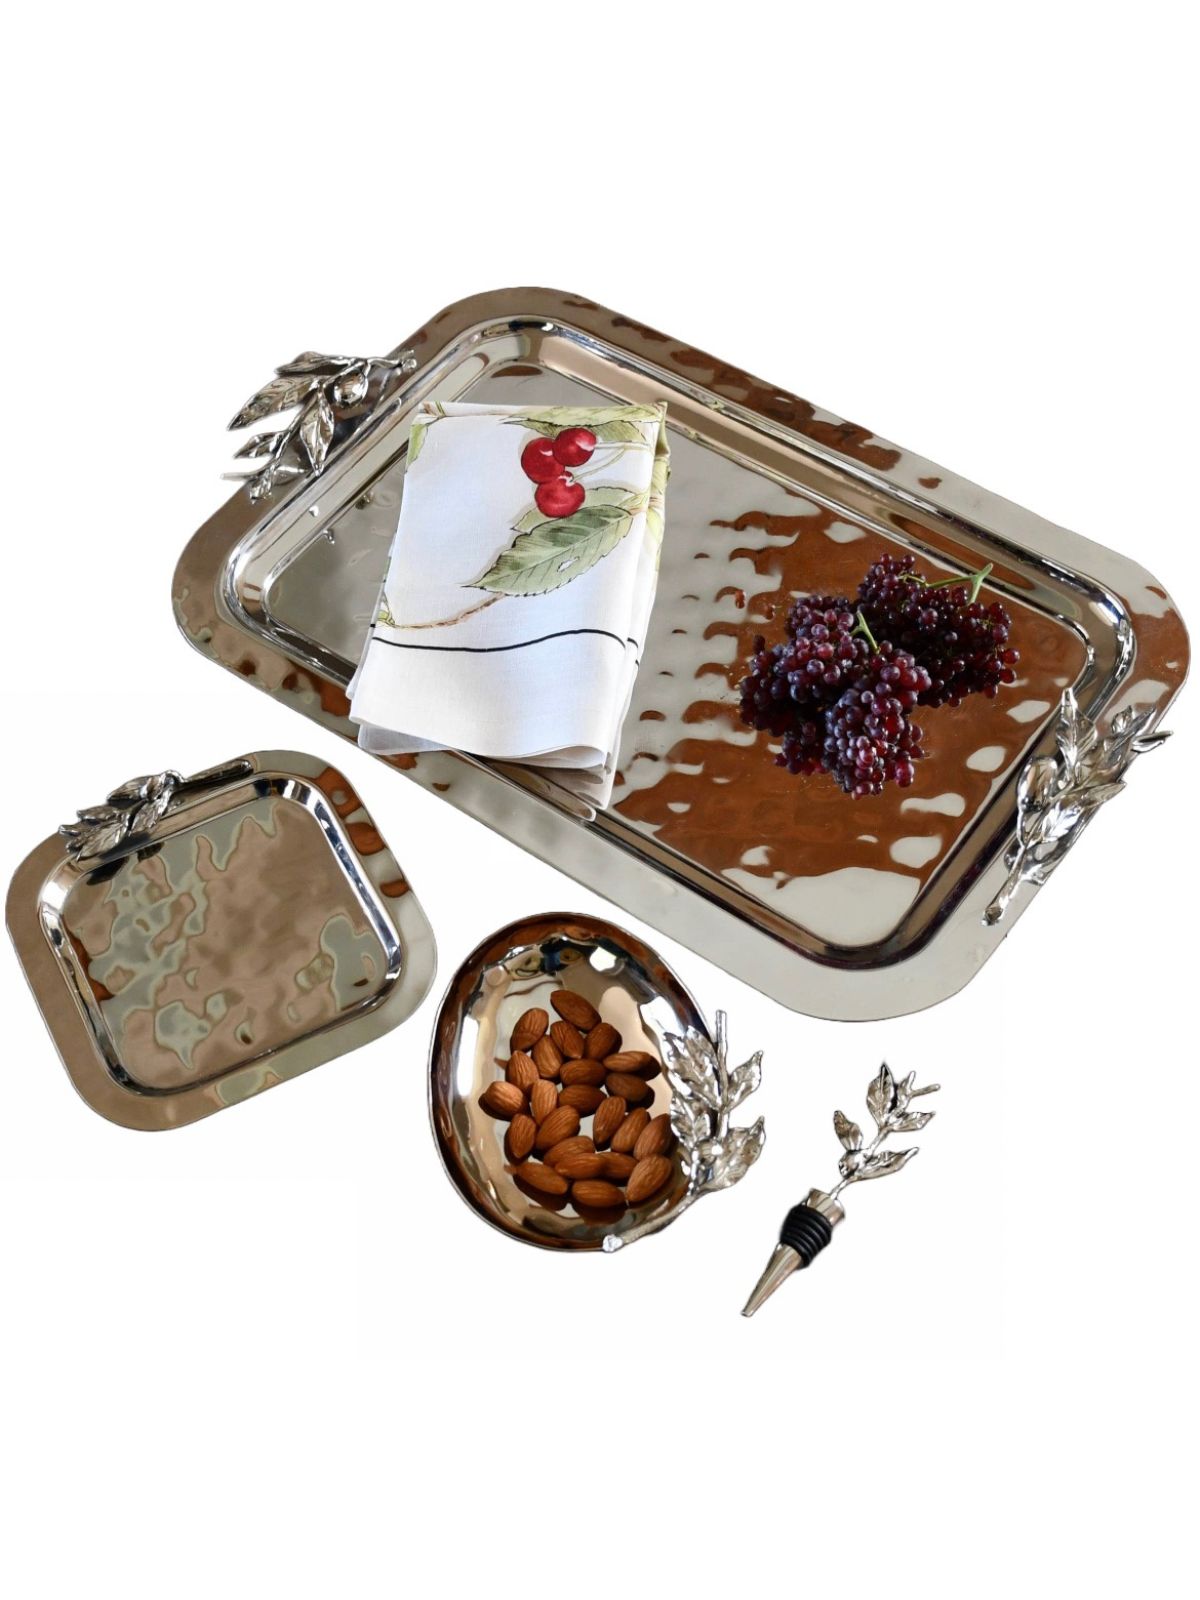 Stainless Steel Large Rectangular Tray with Olive Leaf Design. Shop the Collection at KYA Home Decor.